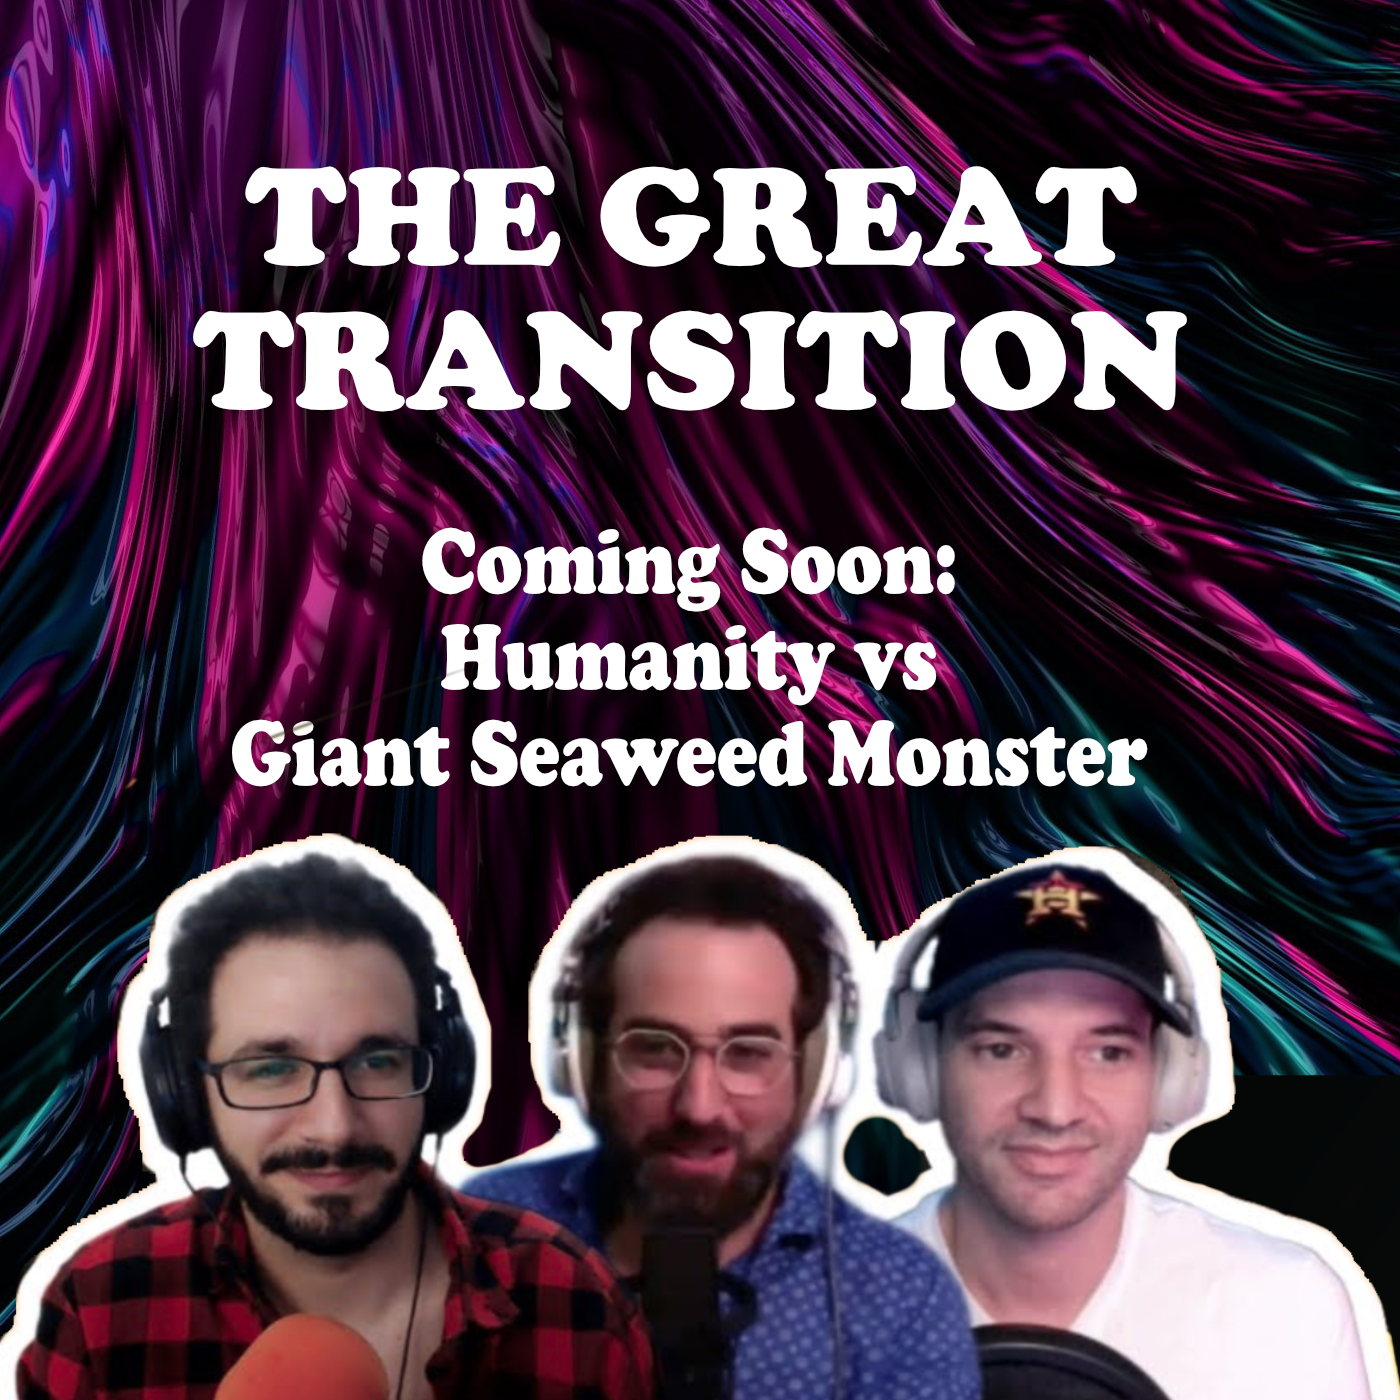 The Great Transition - Coming Soon: Humanity vs Giant Seaweed Monster